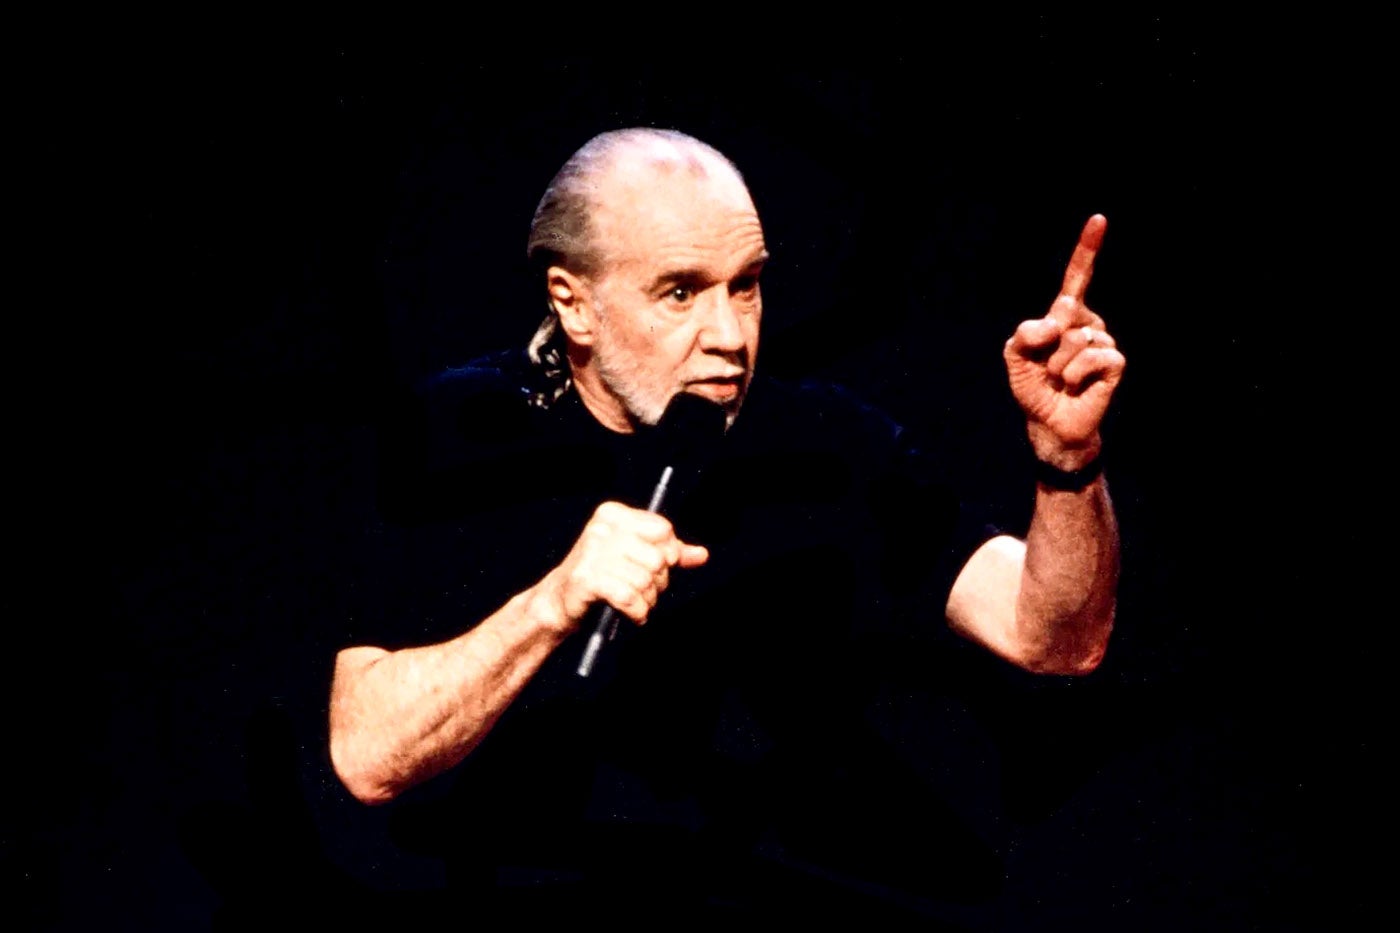 George Carlin on stage in a black t-shirt.